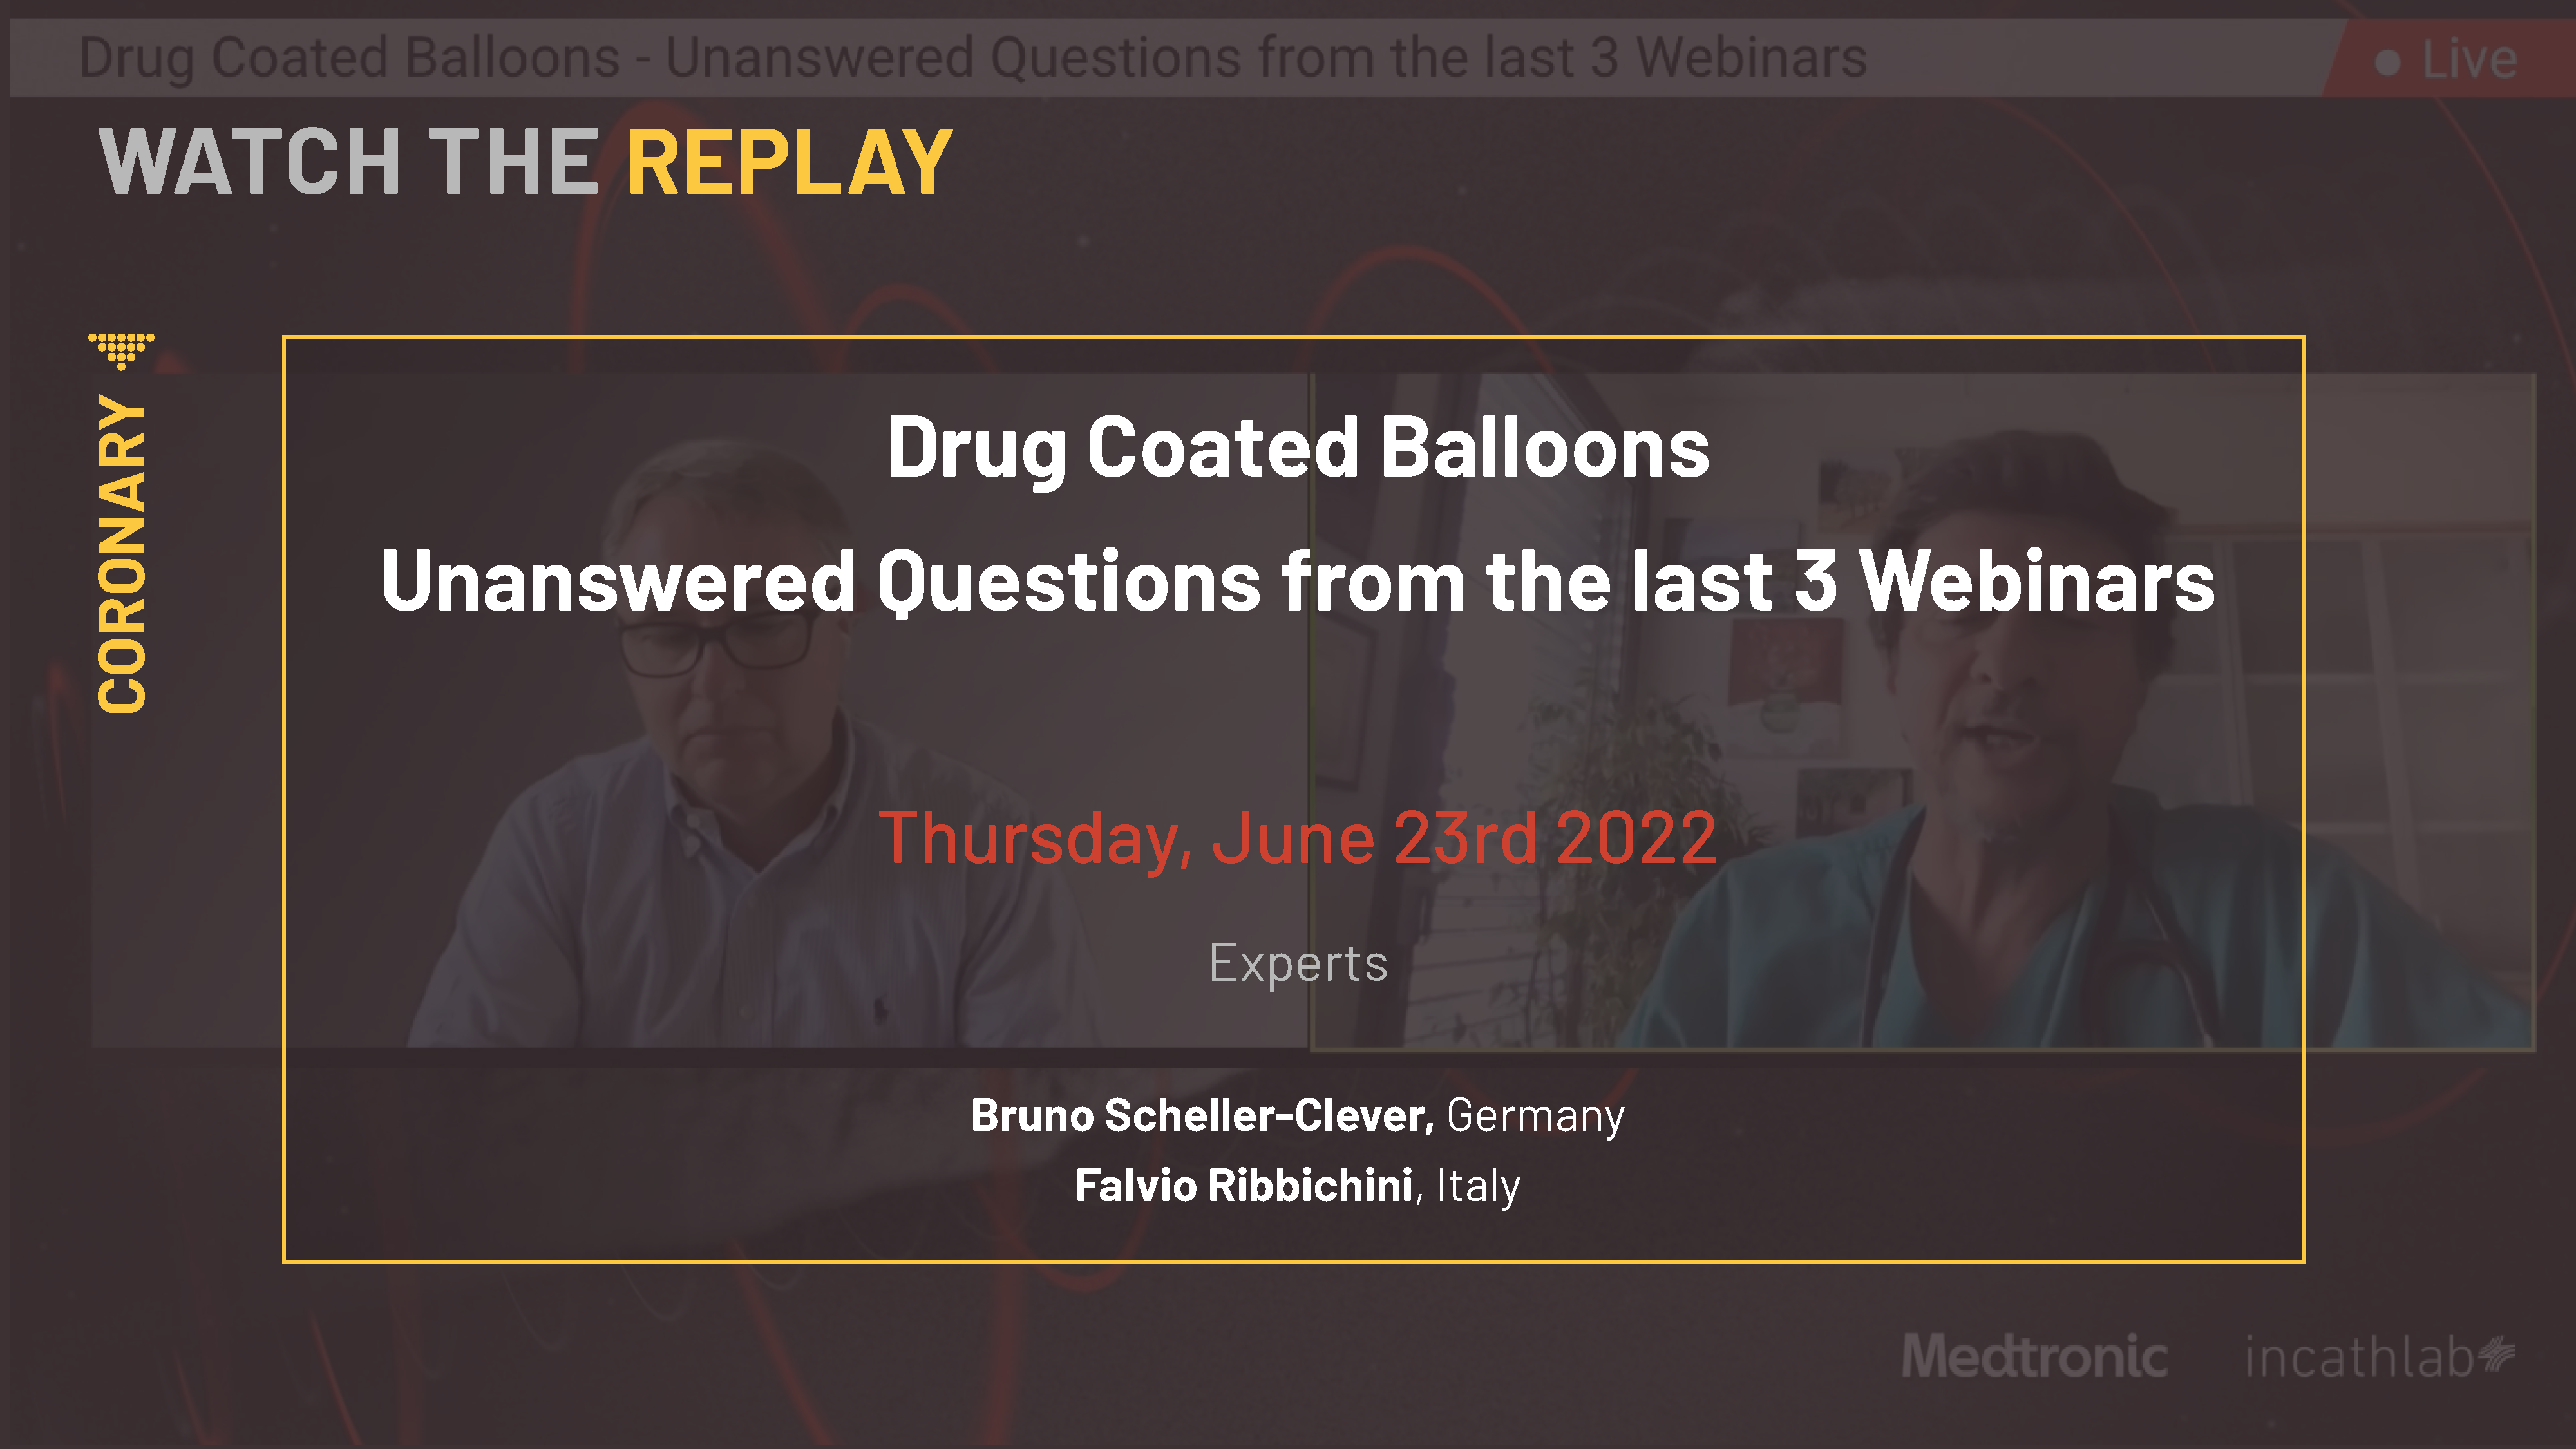 Drug Coated Balloons - The Untold Story